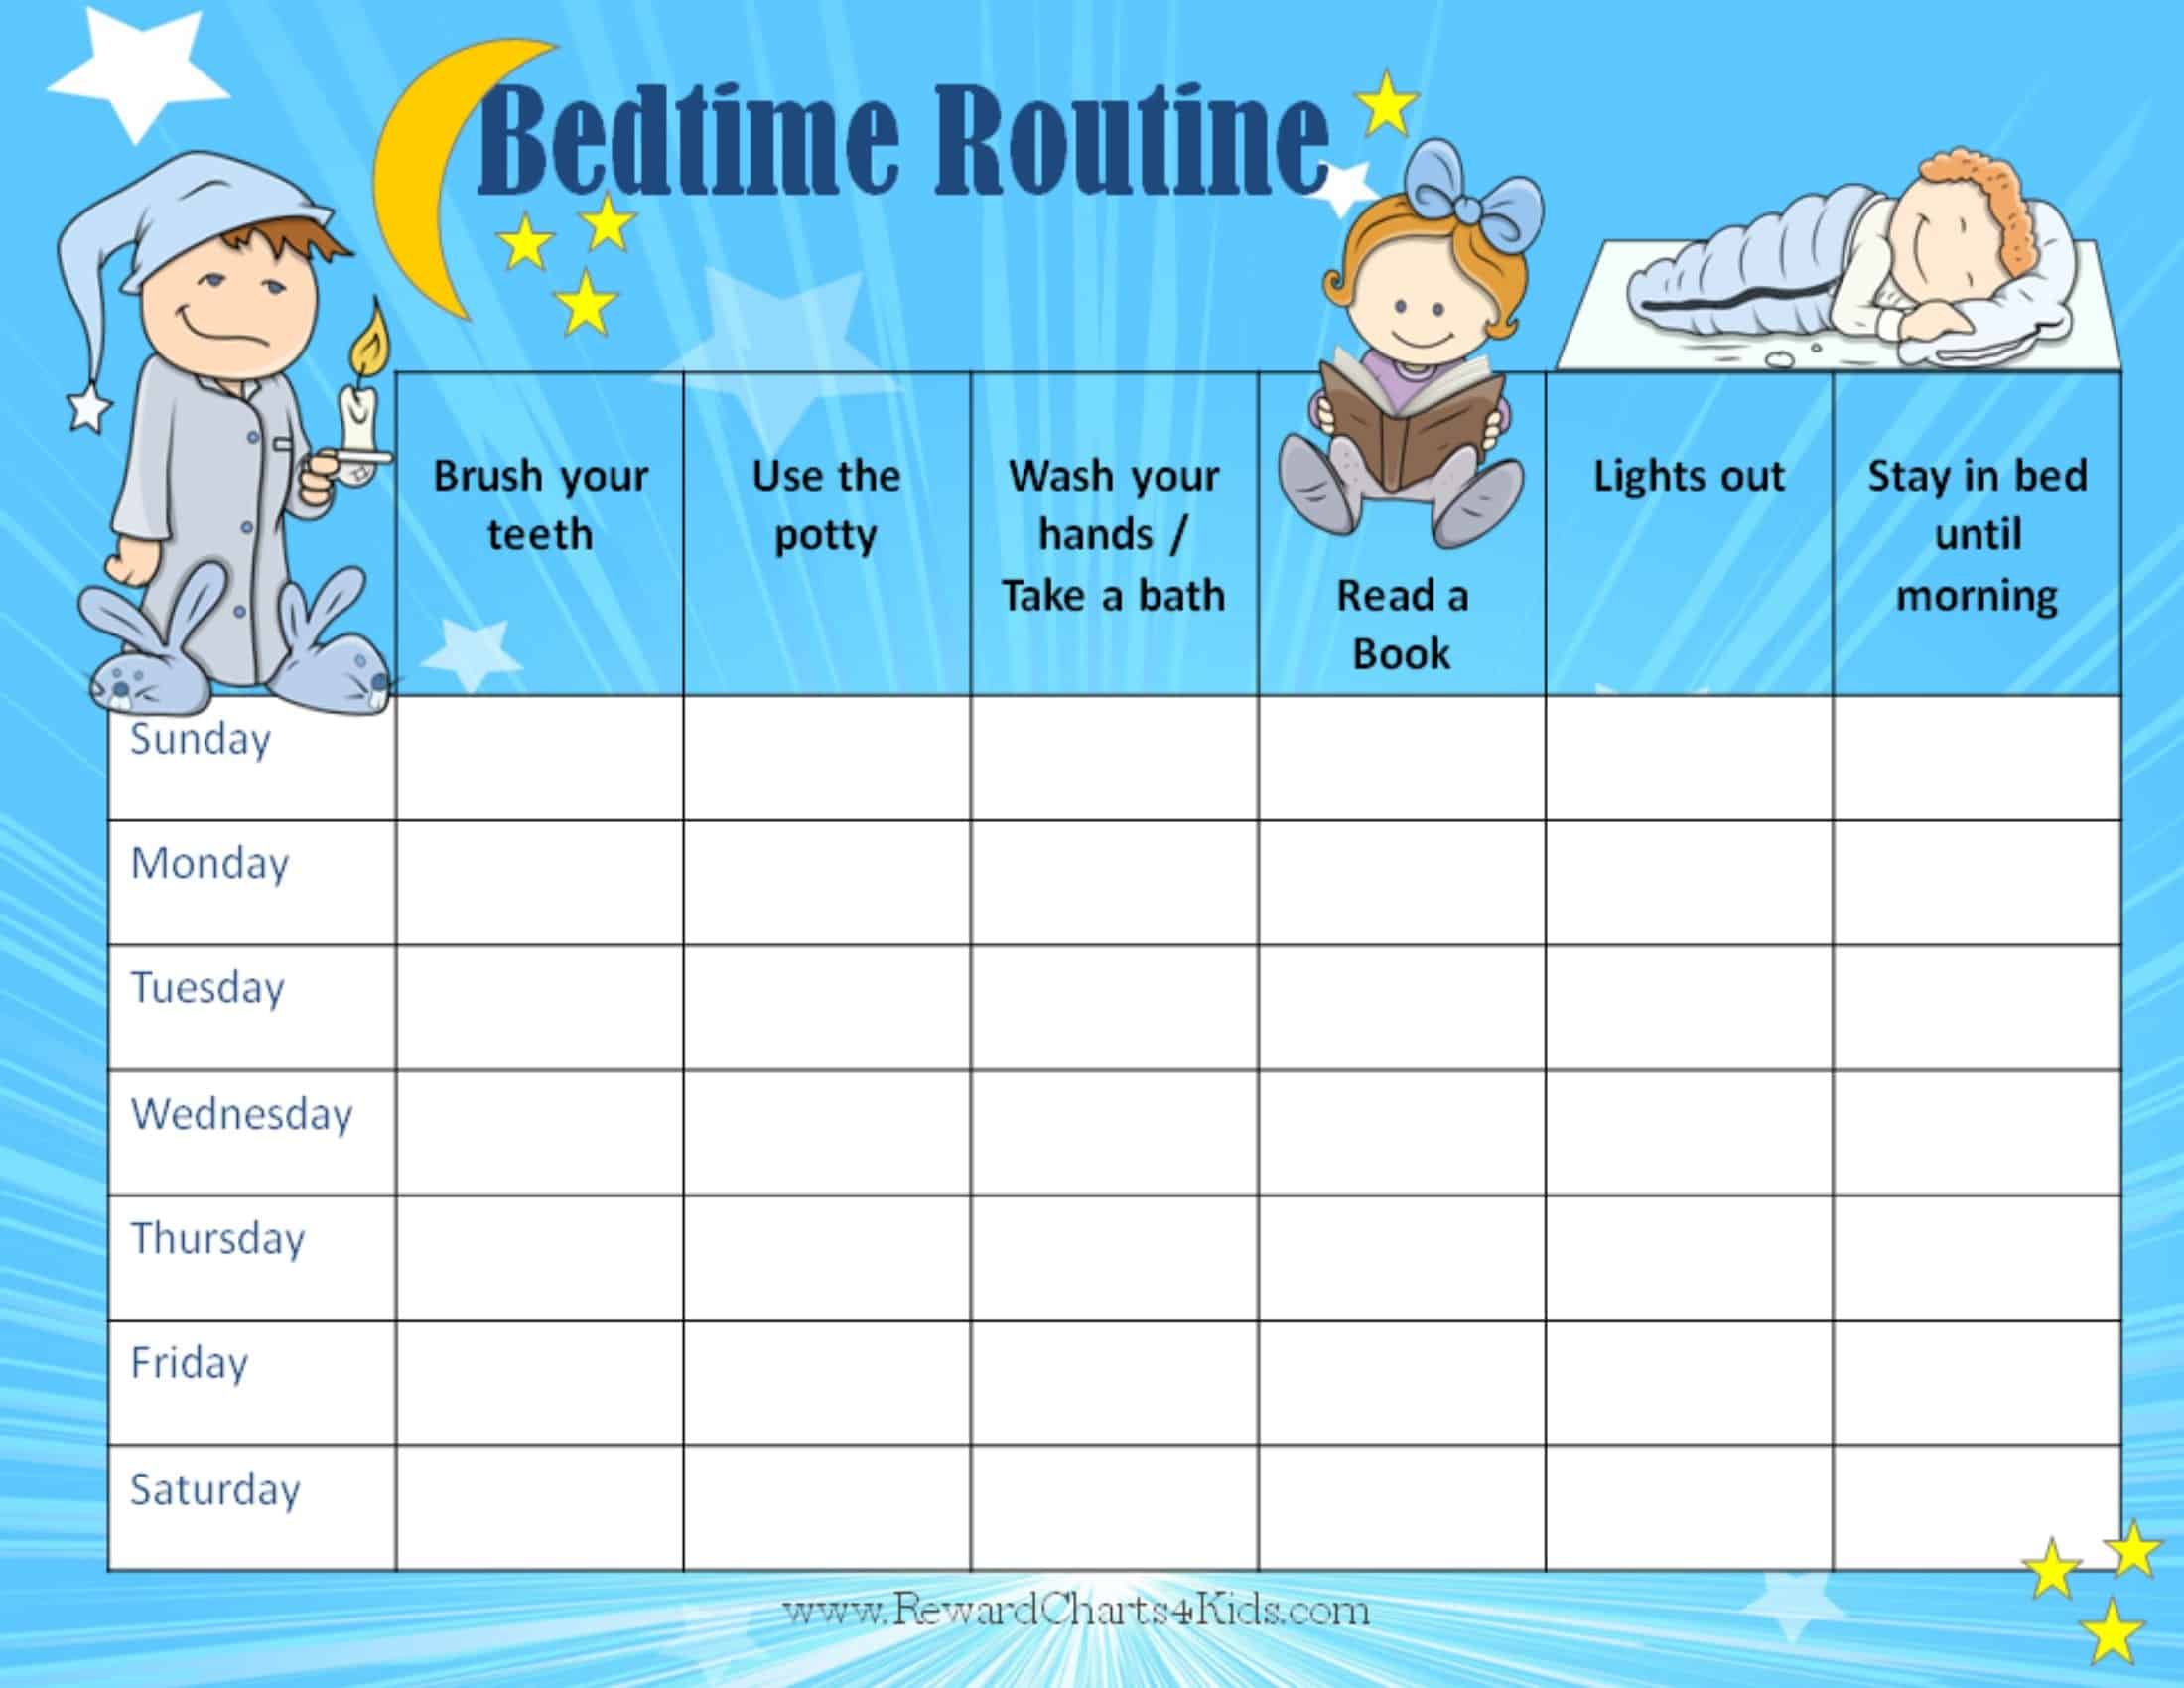 Free Printable Bedtime Routine Chart Customize Online Then Print